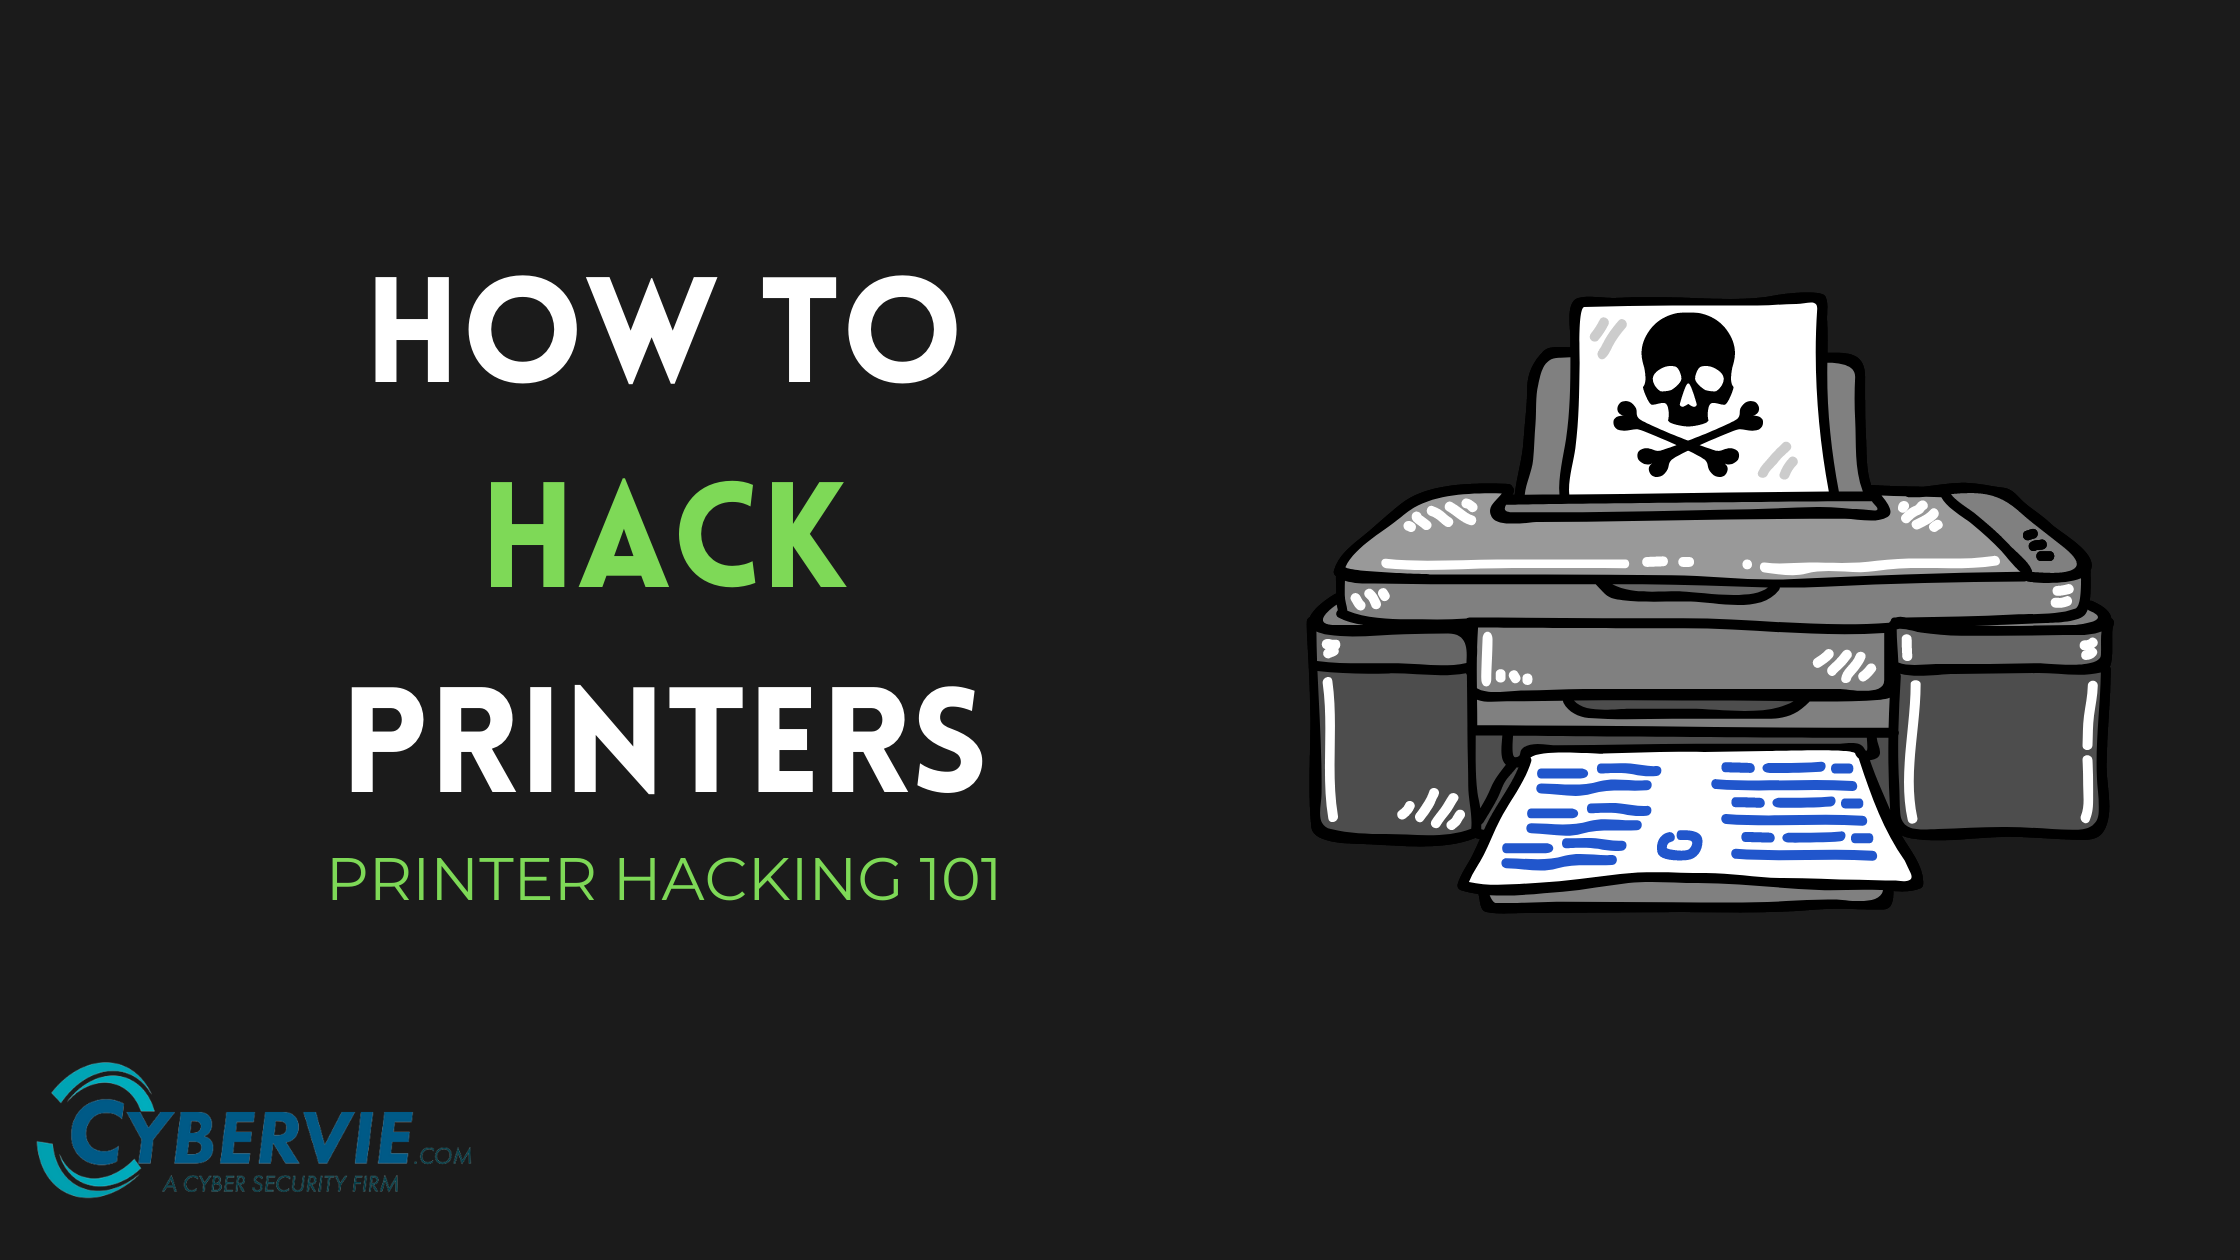 Exploit Code to Hack Lexmark Printers Published for Firmware CXLBL.081.225. (Security flaws STILL not fixed) | Tonernews